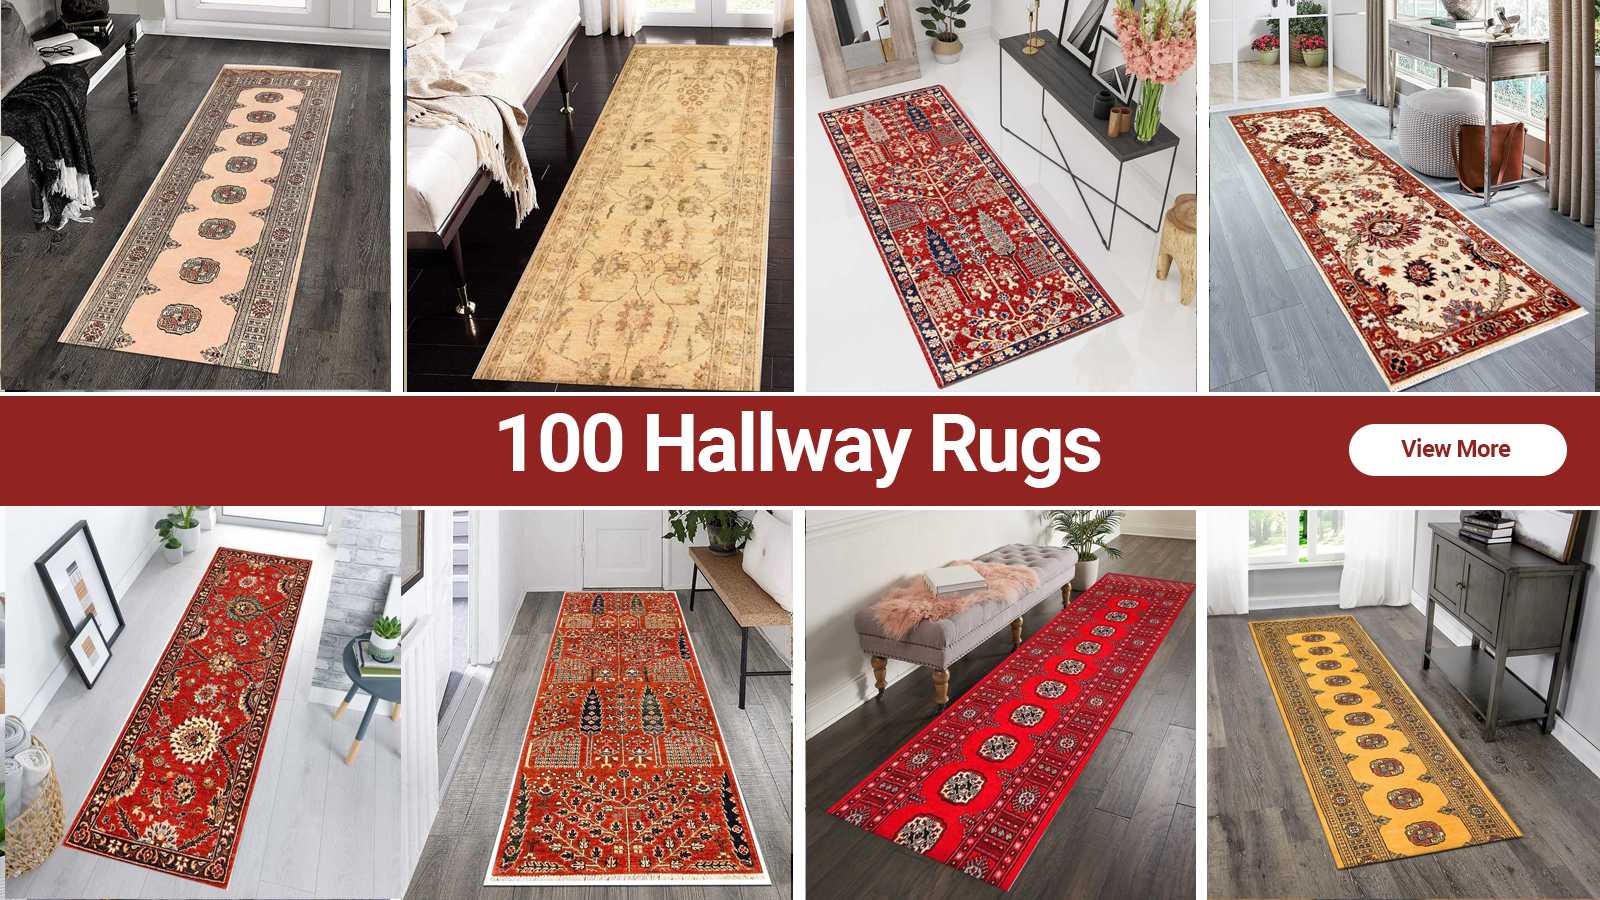 Best hall runners: stylish narrow rugs for a snug space - Your